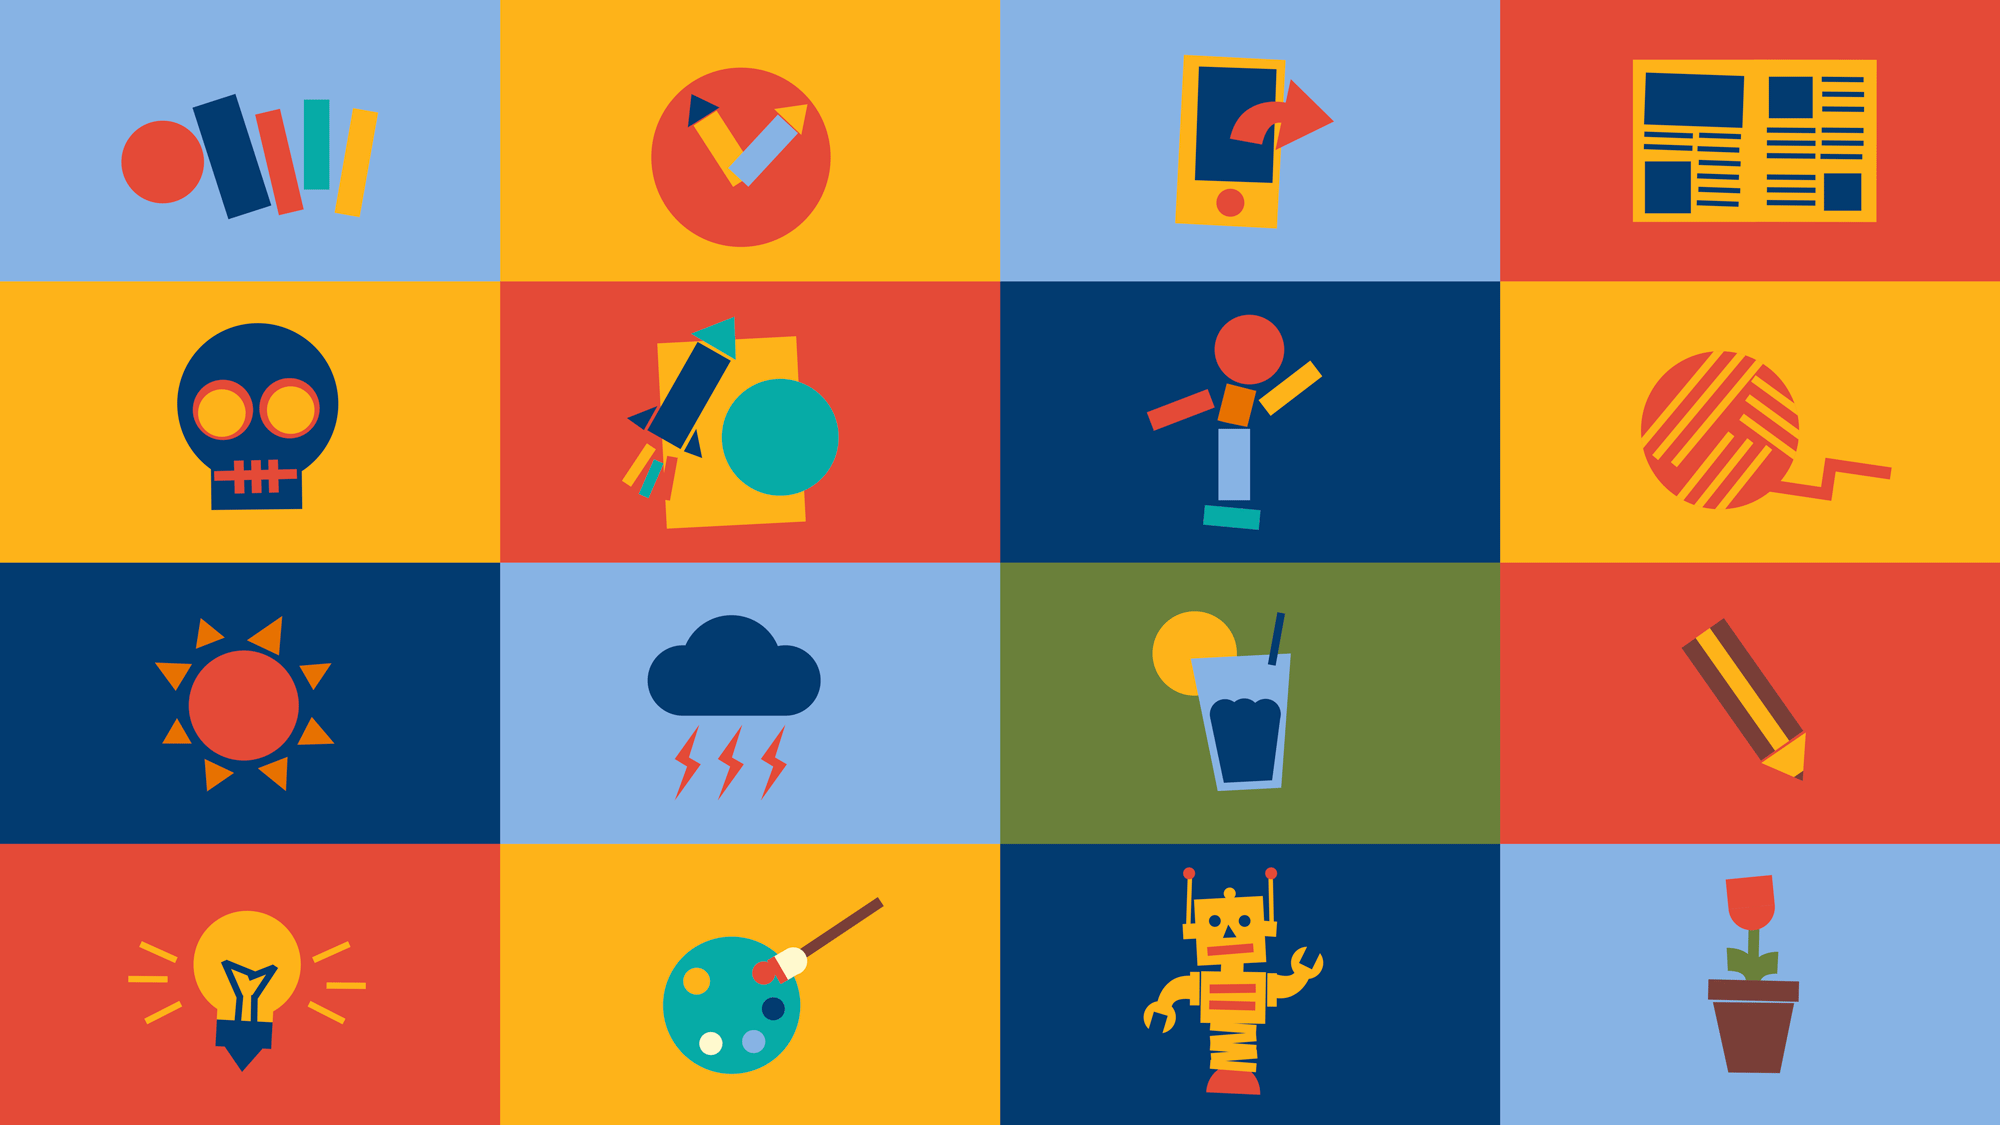 Tiled image of various illustrations used by Glen Eira Libraries.